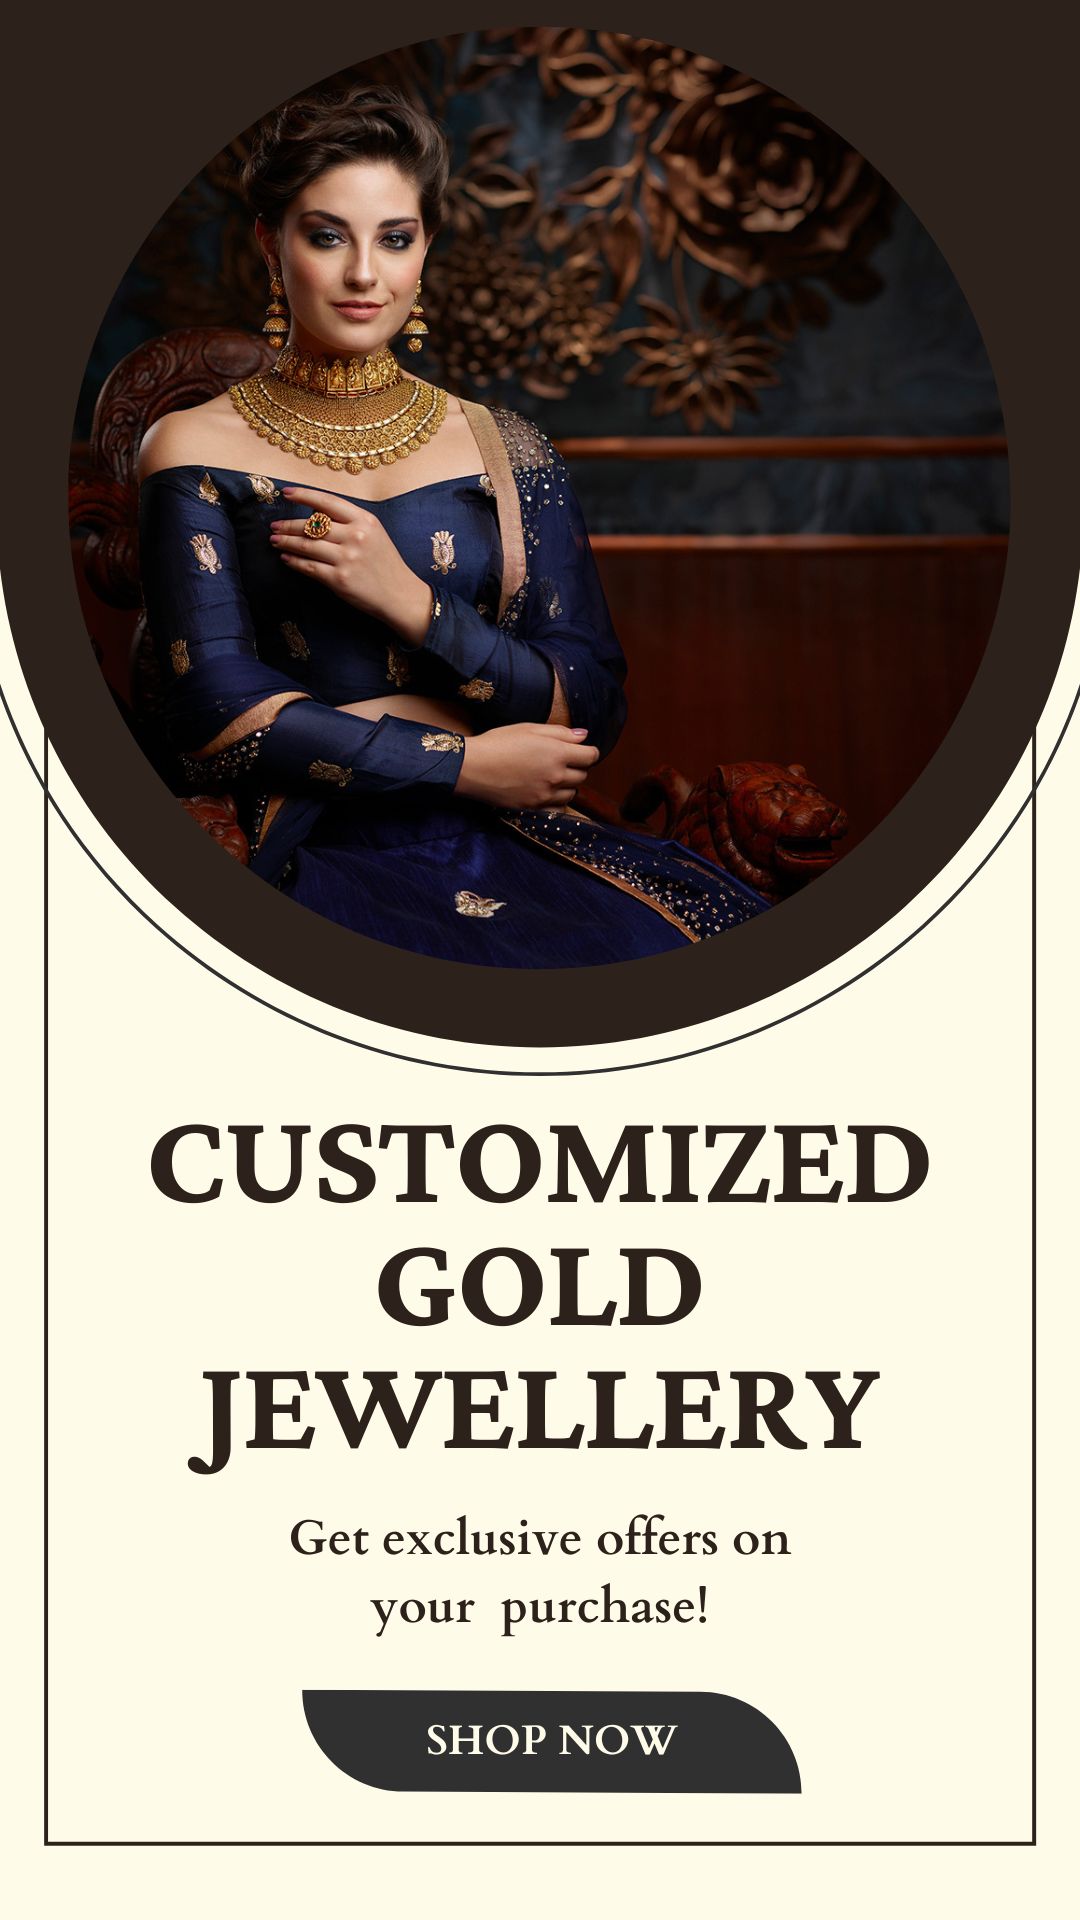 How Do Our Parents Shop For Jewellery V/s How Do We Shop For Jewellery? – CieroJewels – Latest Indian Artificial Jewellery Website